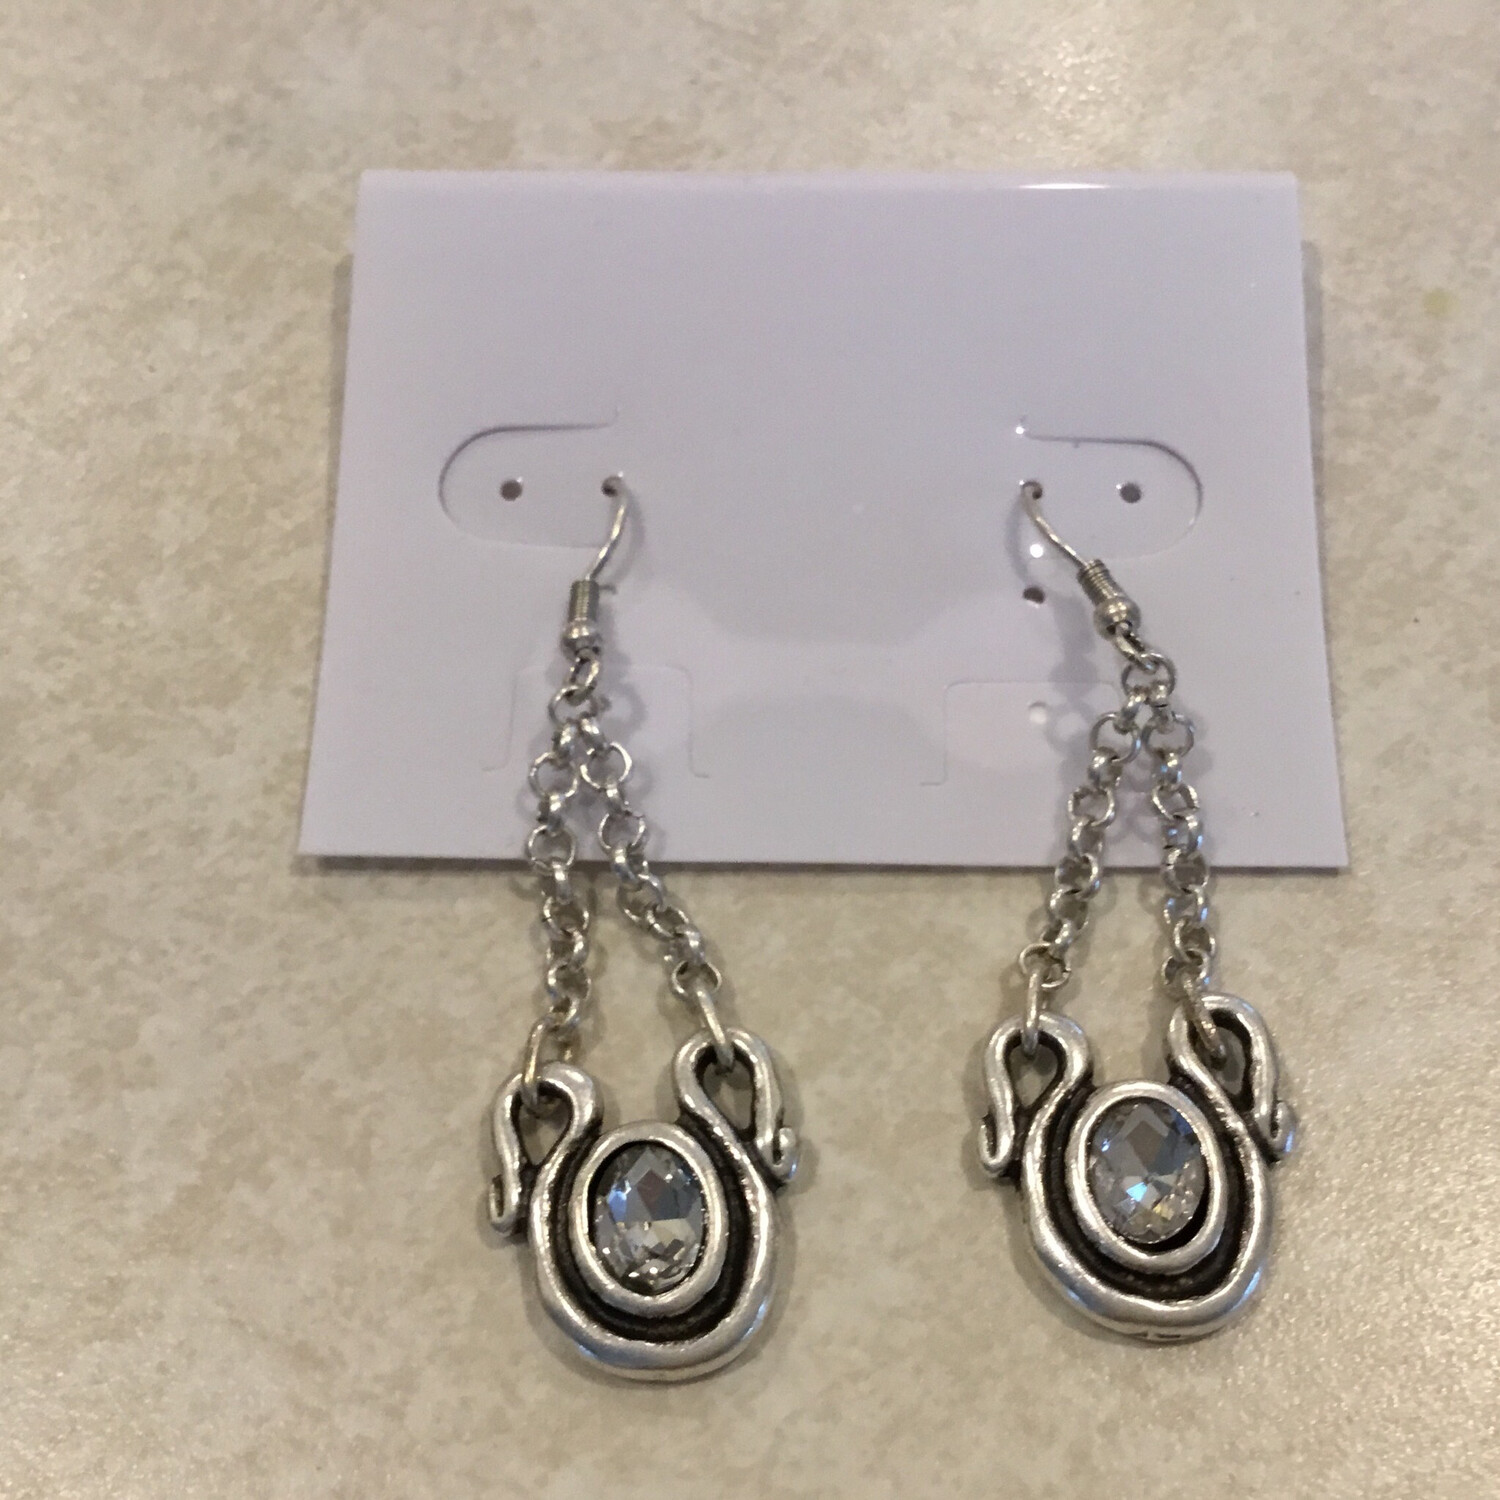 Handmade Pewter Earrings With French Hooks And Clear Crystal